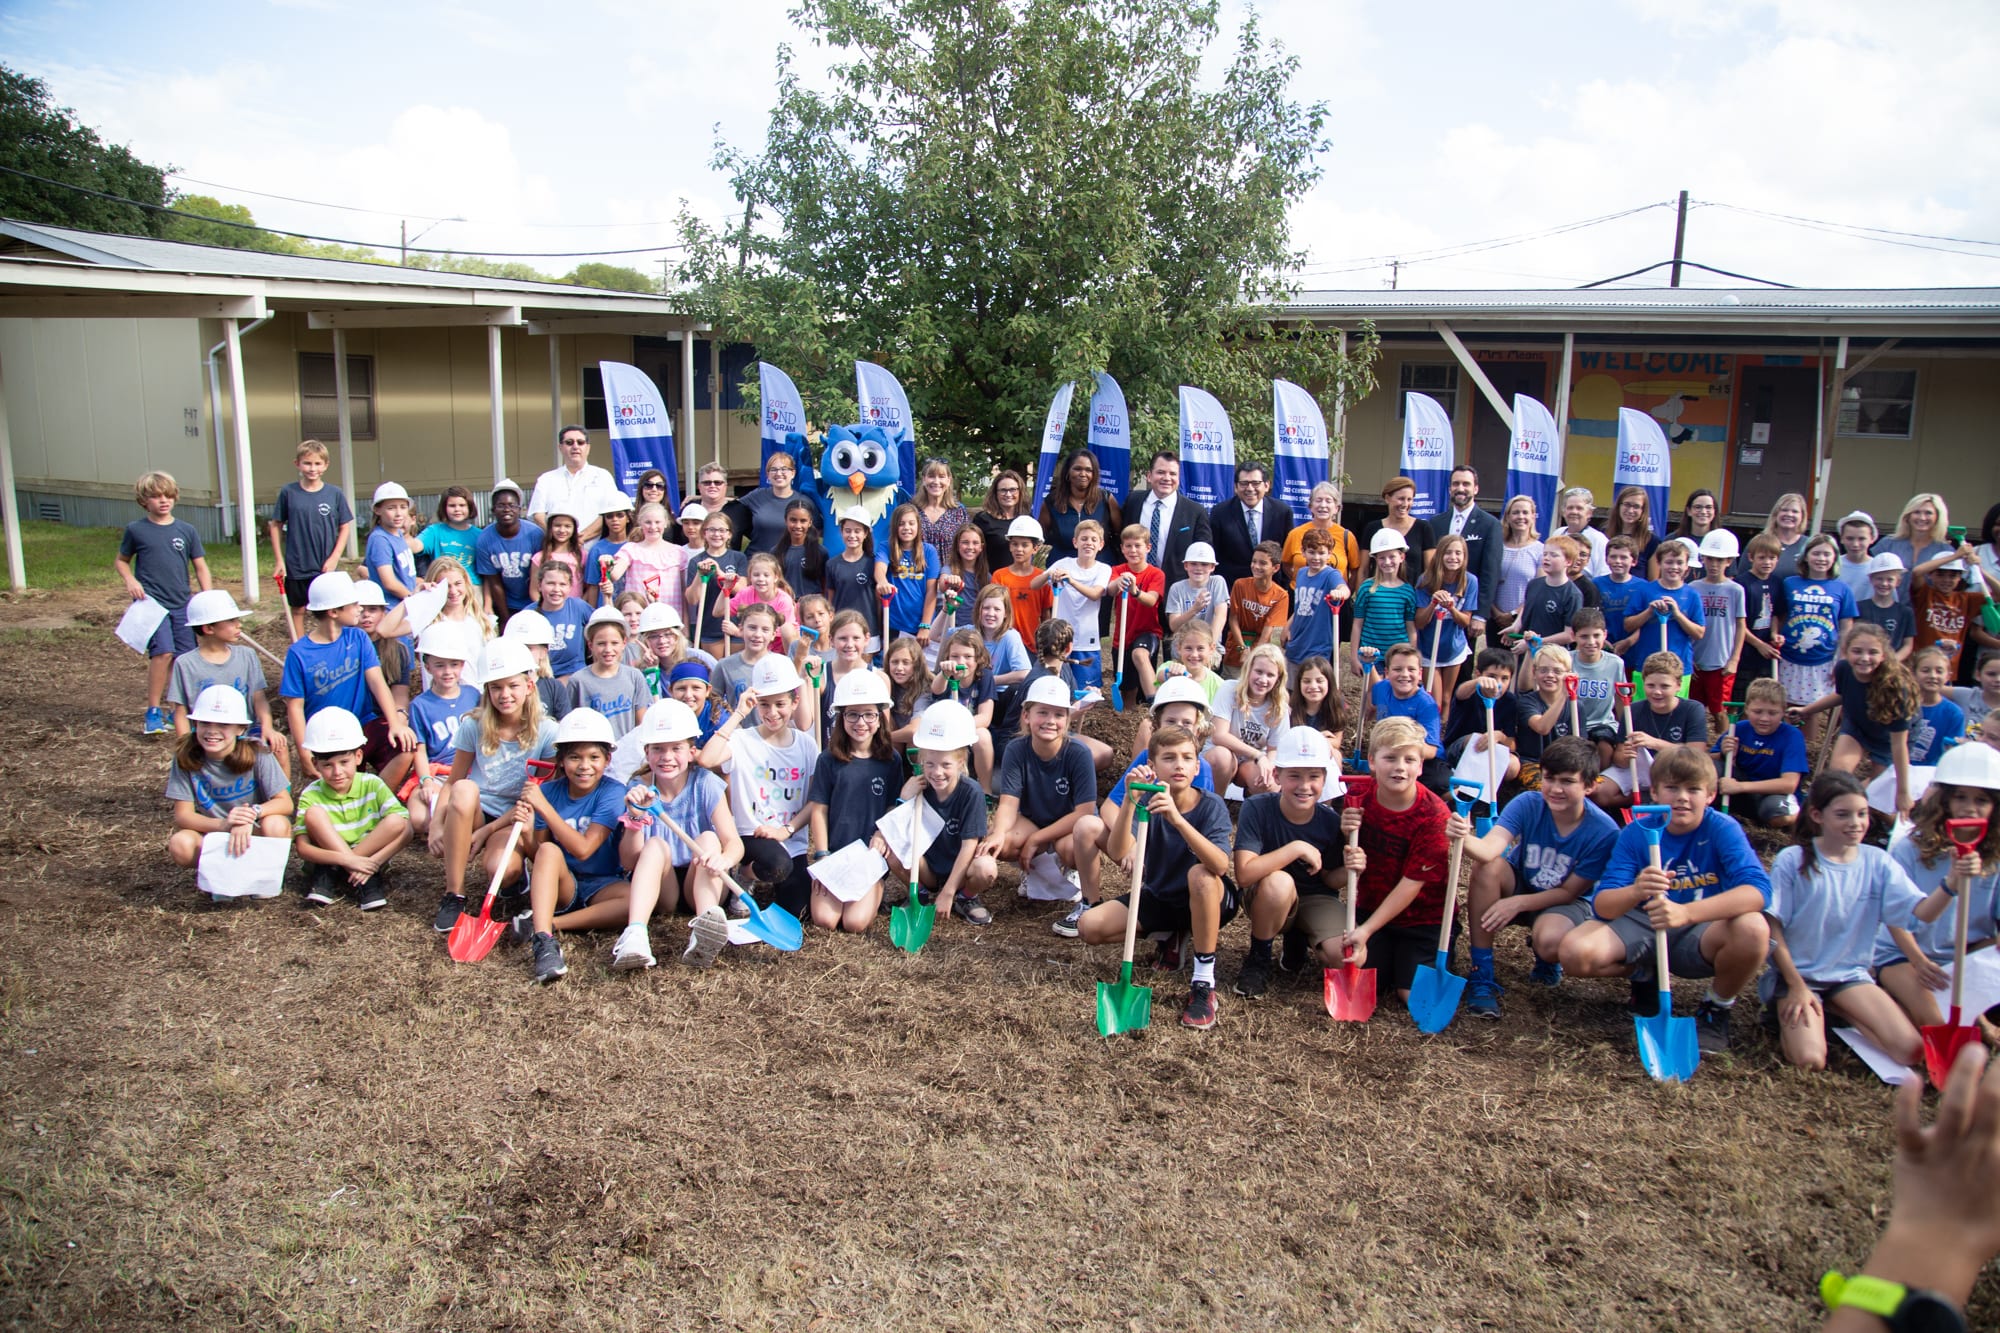 Fifth grade students take part in the groundbreaking ceremony for the Doss Elementary School modernization